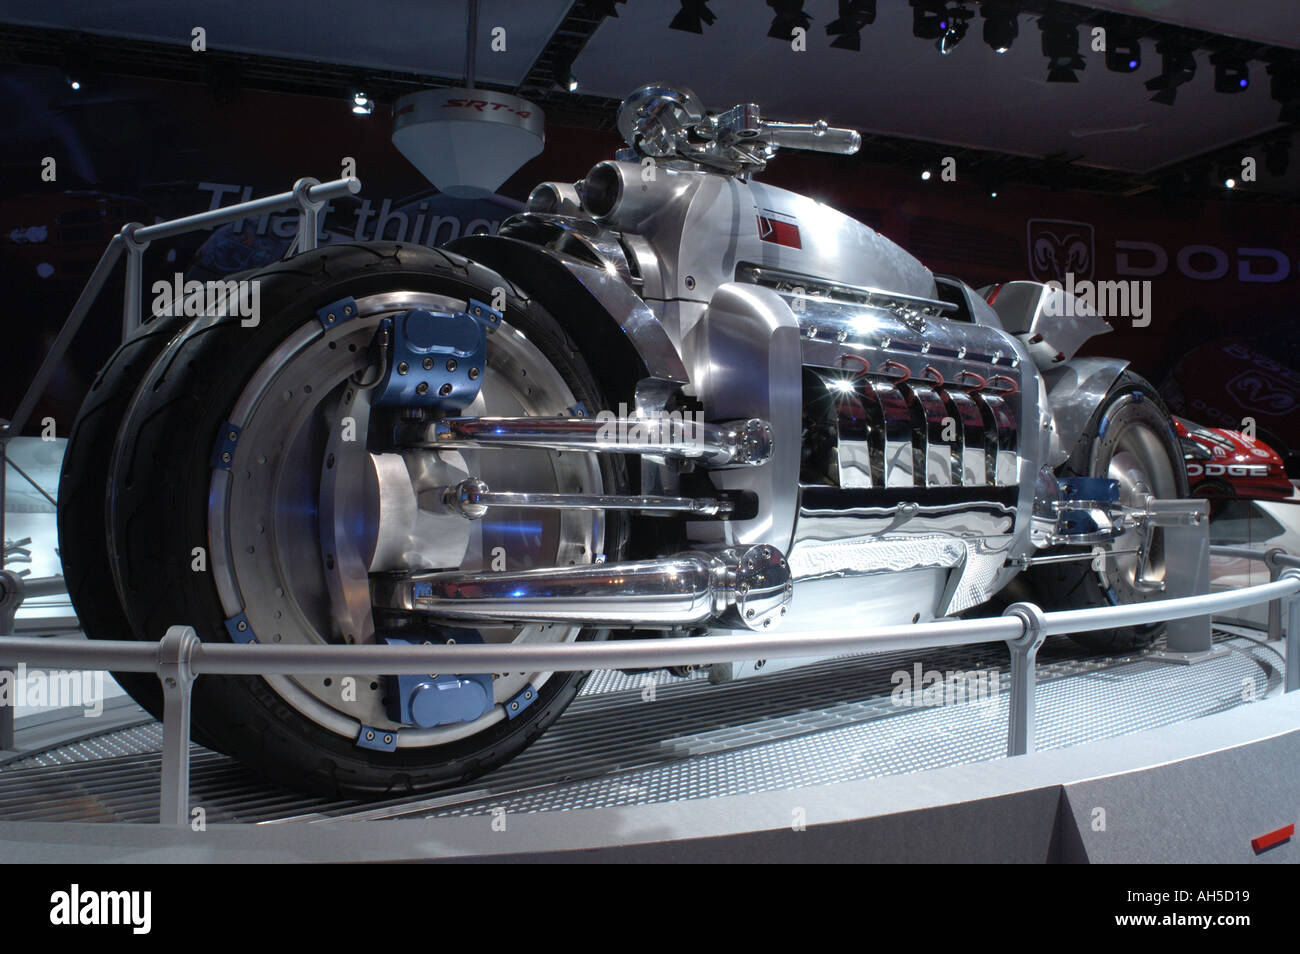 Dodge Tomahawk motorcycle concept at the North American International Auto Show 2004 Stock Photo